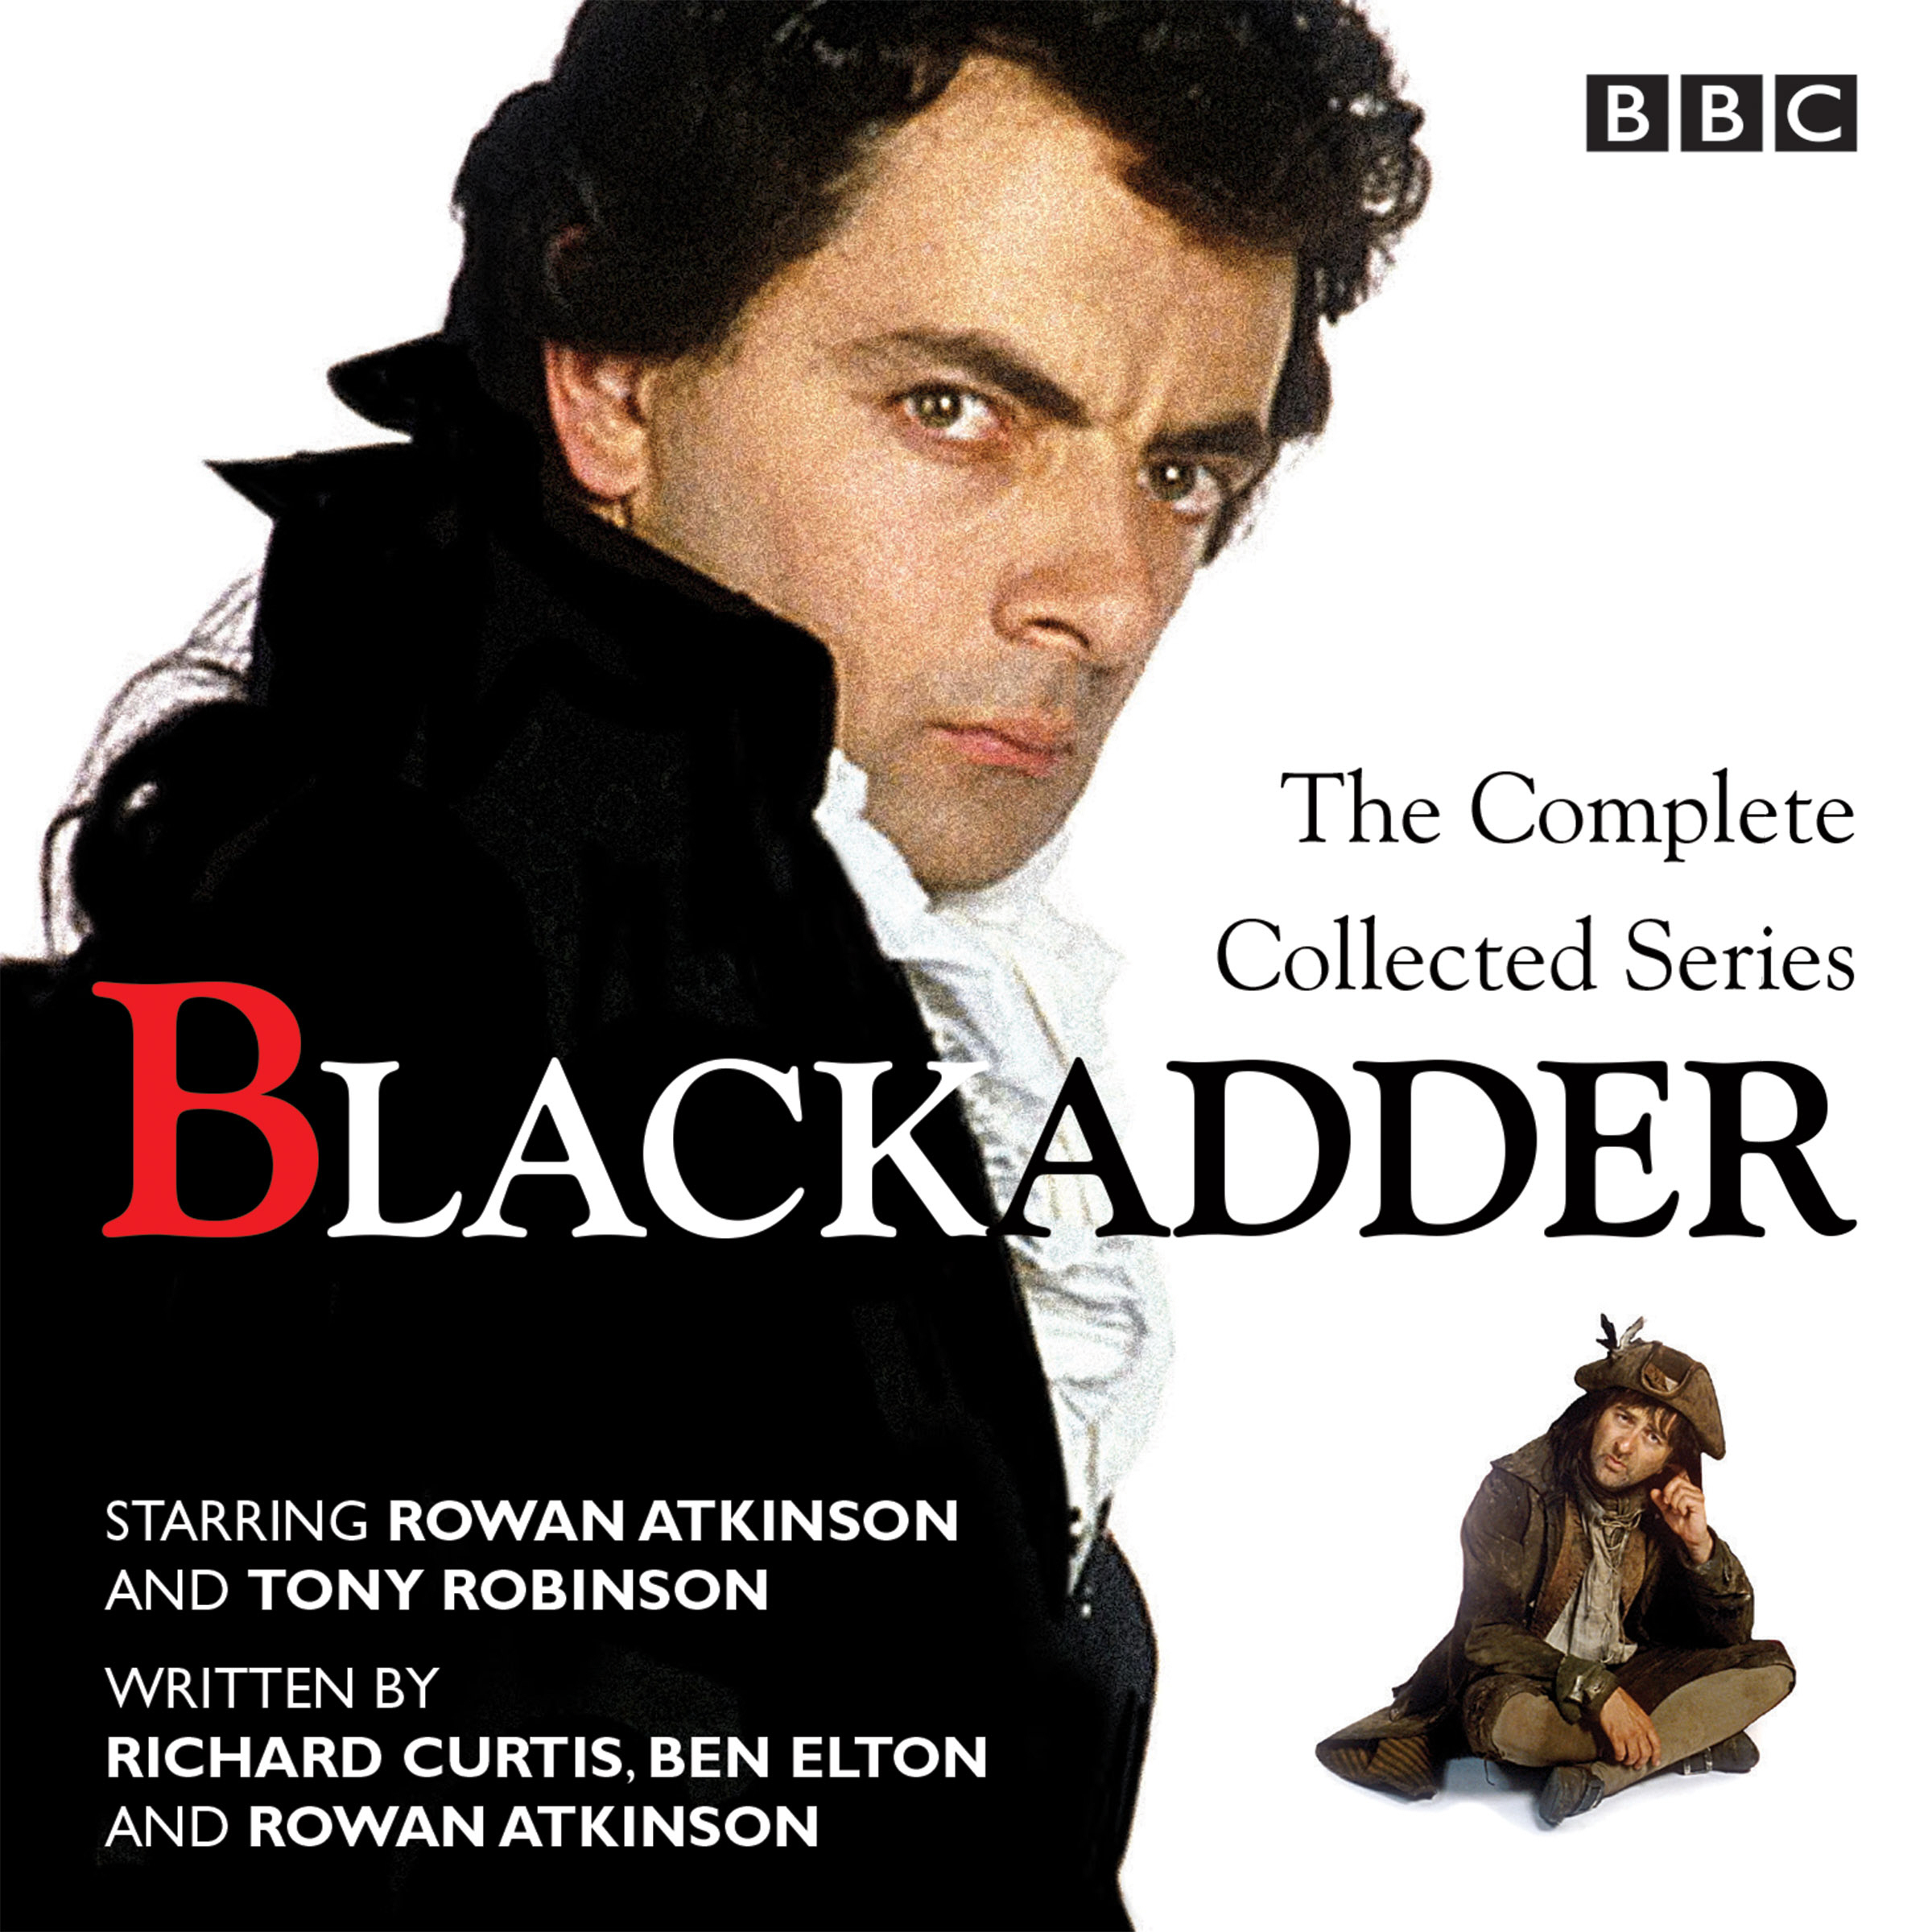 Audiobook cover for Blackadder: a photograph of Rowan Atkinson as Blackadder takes up most of the image, with Baldrick at the bottom and the title across the middle.